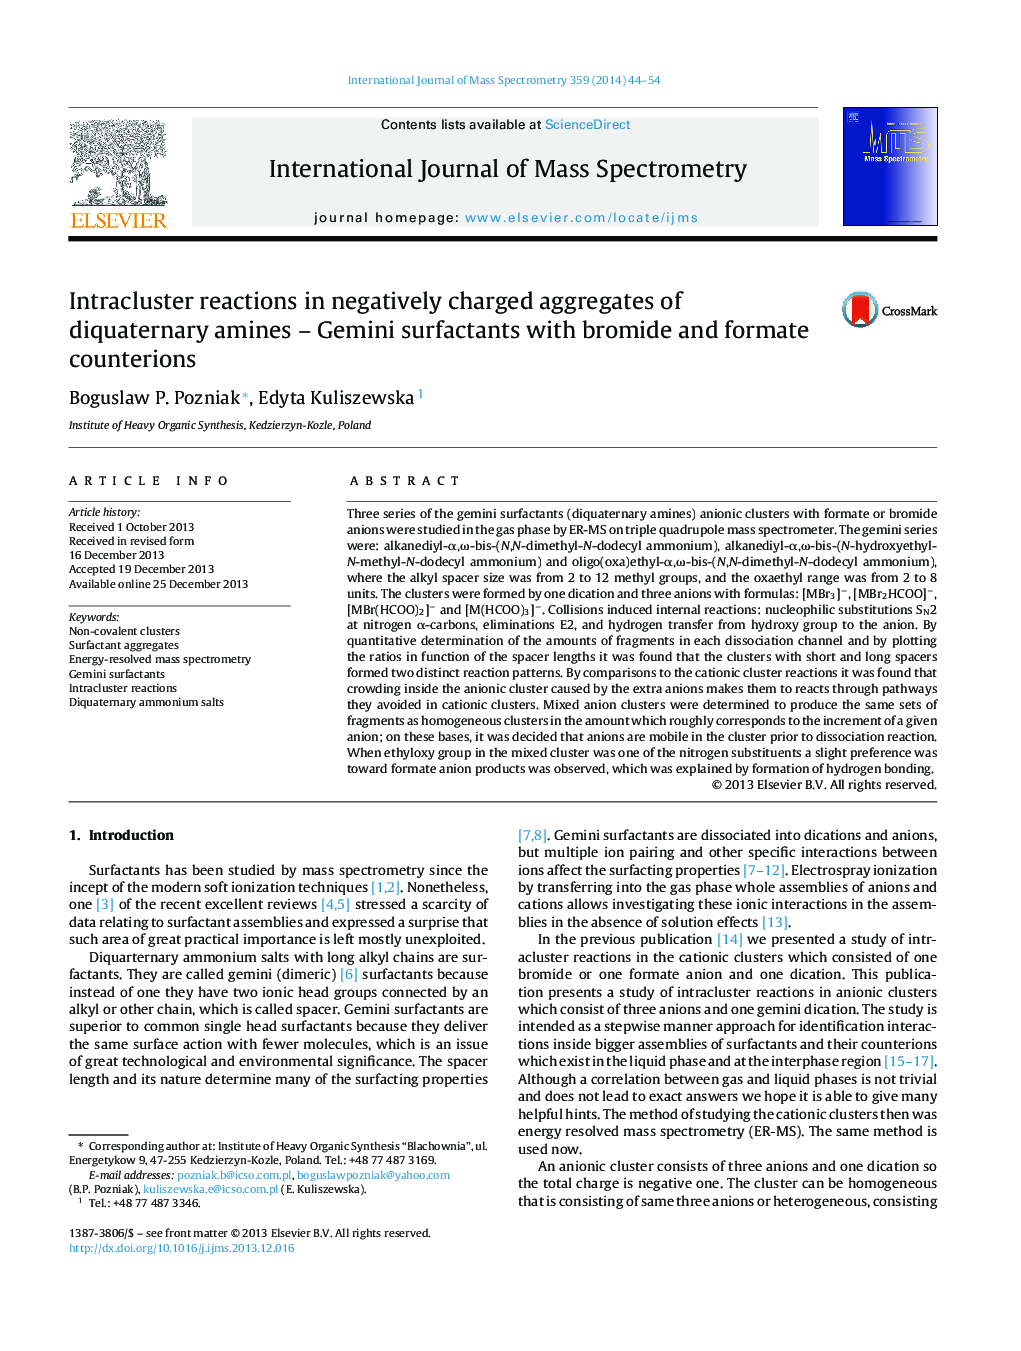 Intracluster reactions in negatively charged aggregates of diquaternary amines - Gemini surfactants with bromide and formate counterions